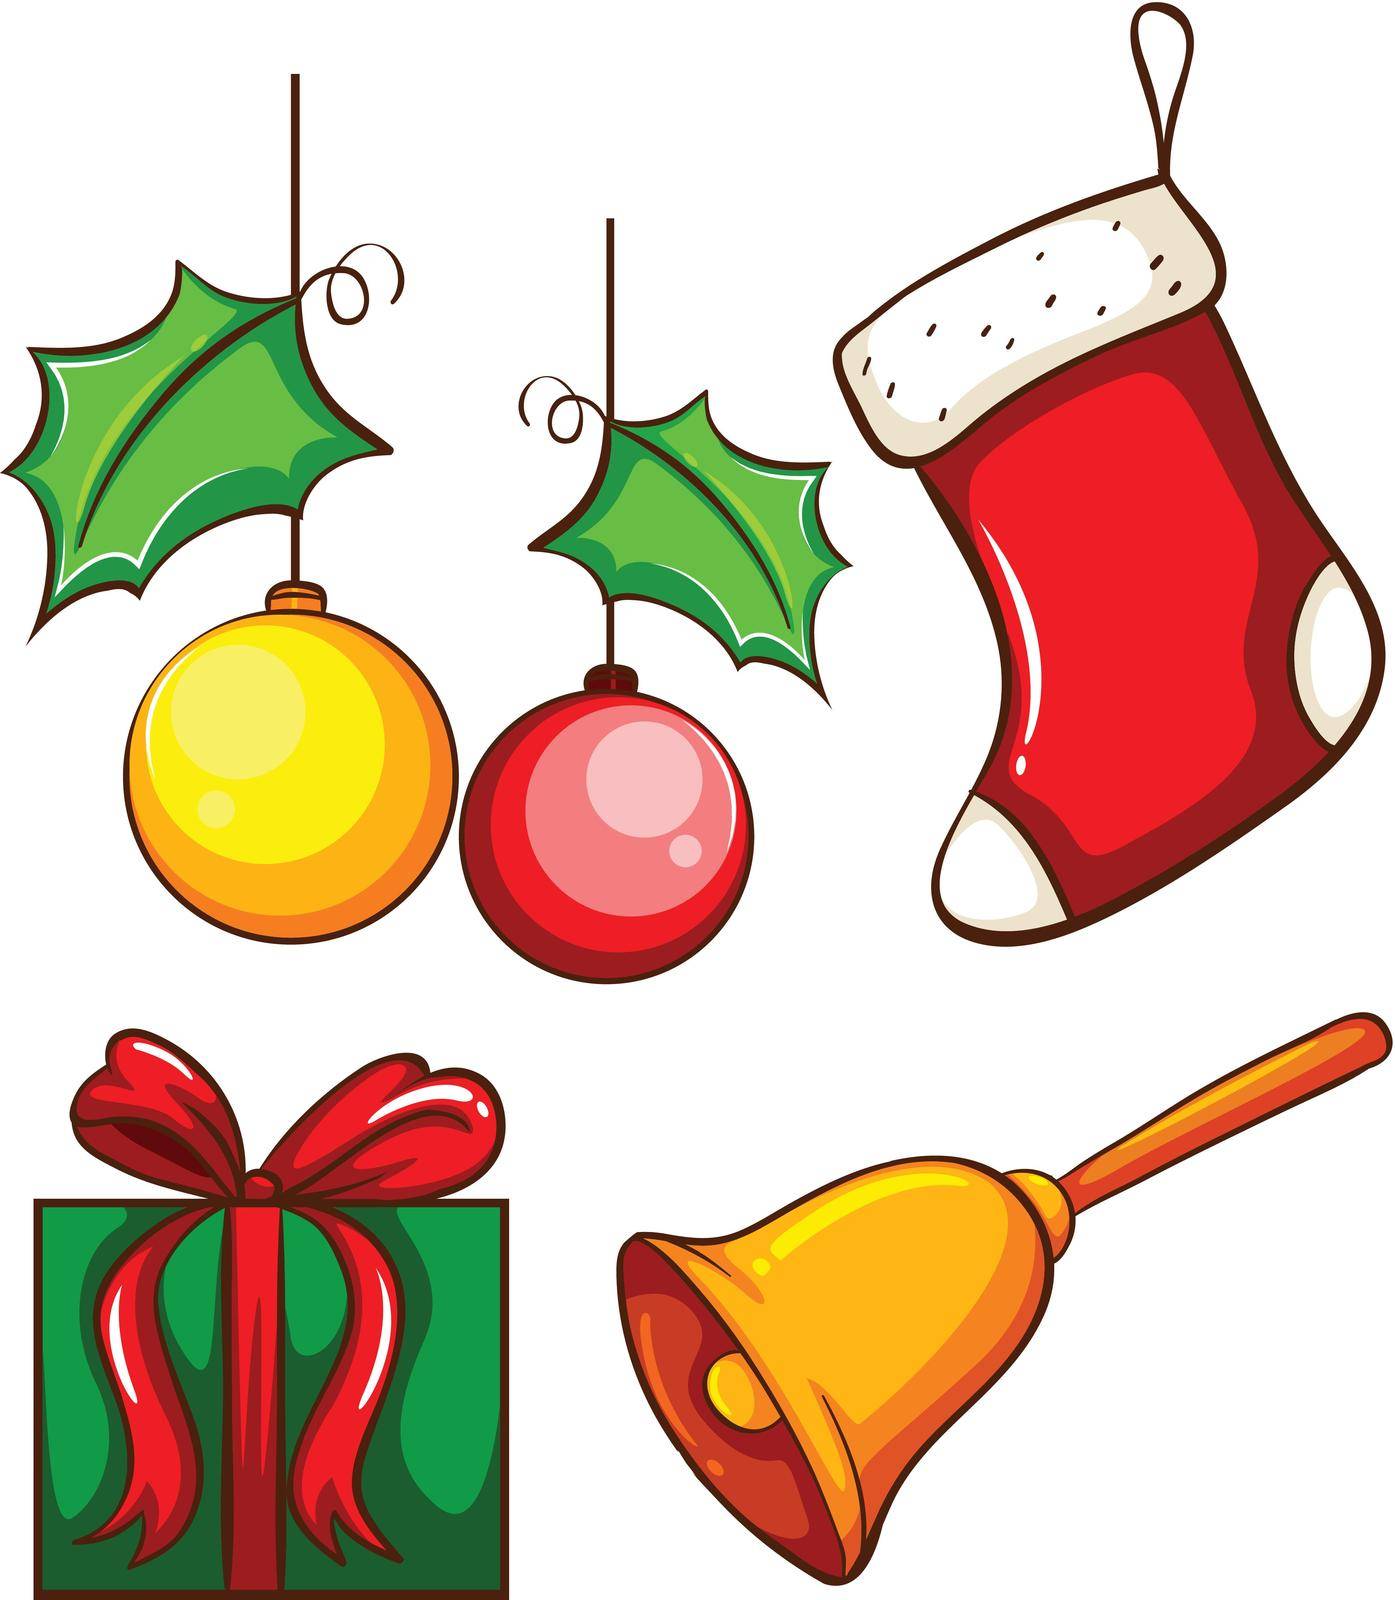 Illustration of the christmas decorations on a white background